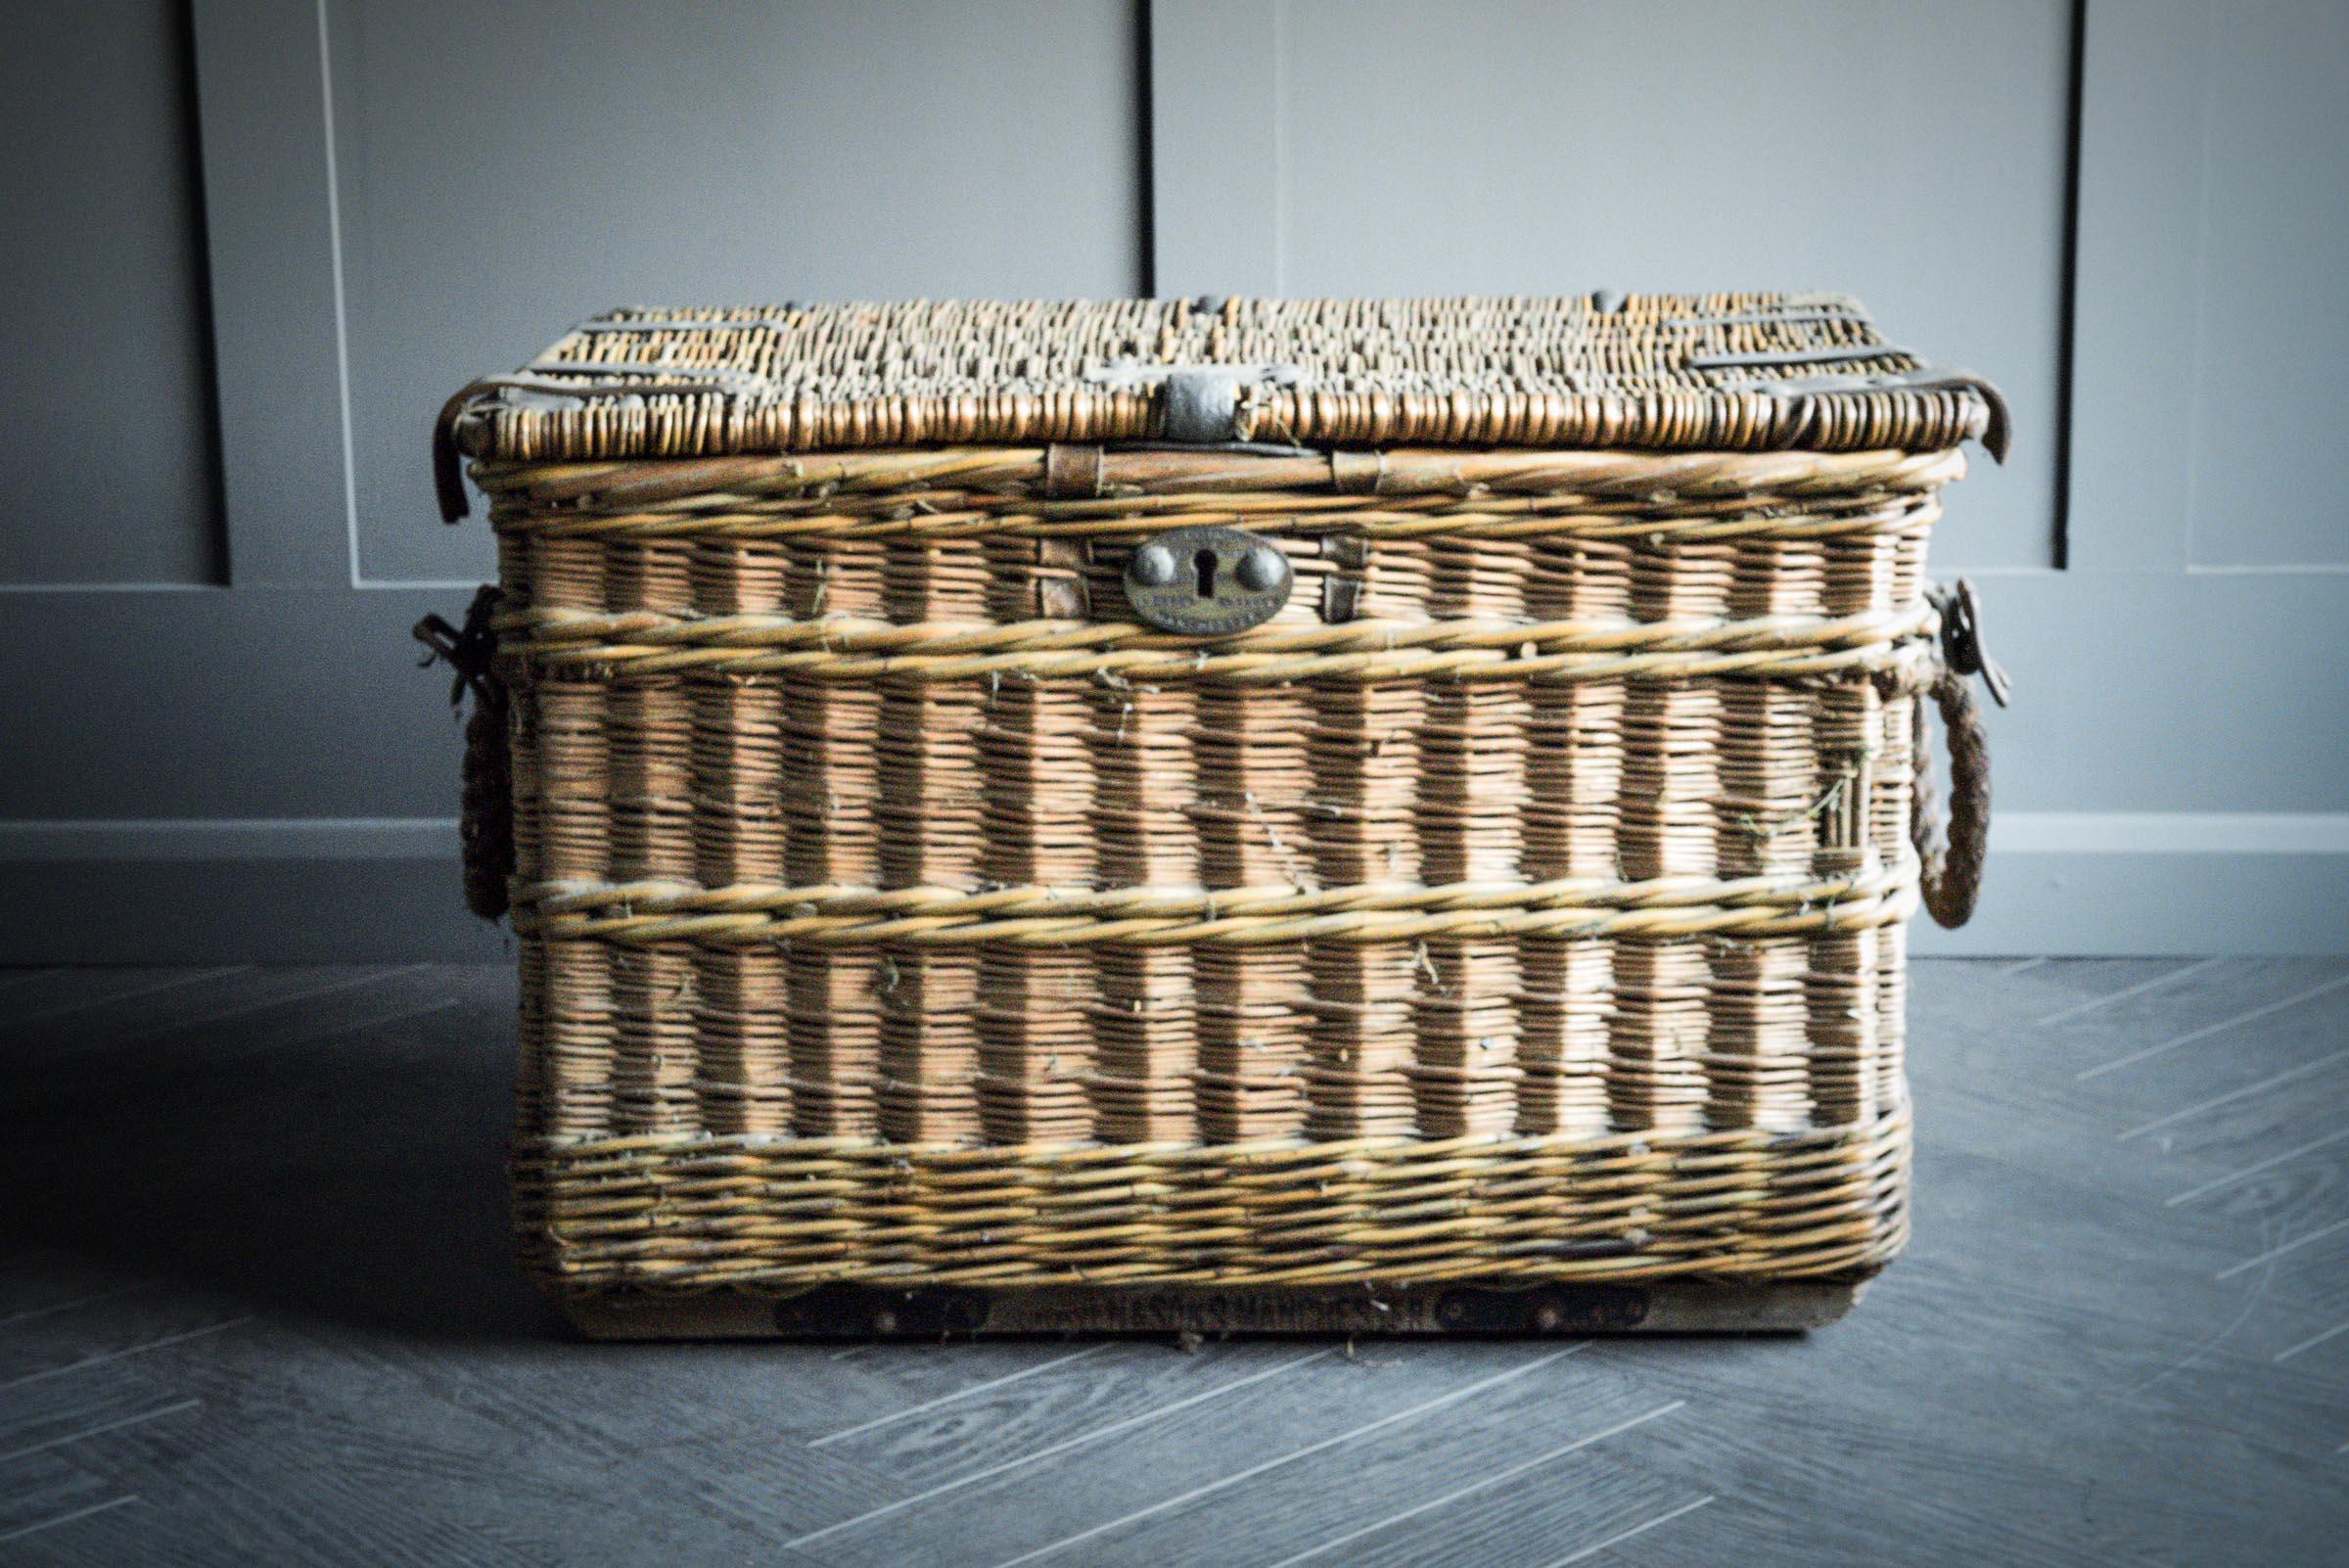 Cravens Laundry basket made from wicker with thick rope handles on either end, finished with leather straps and clasp for fastening.